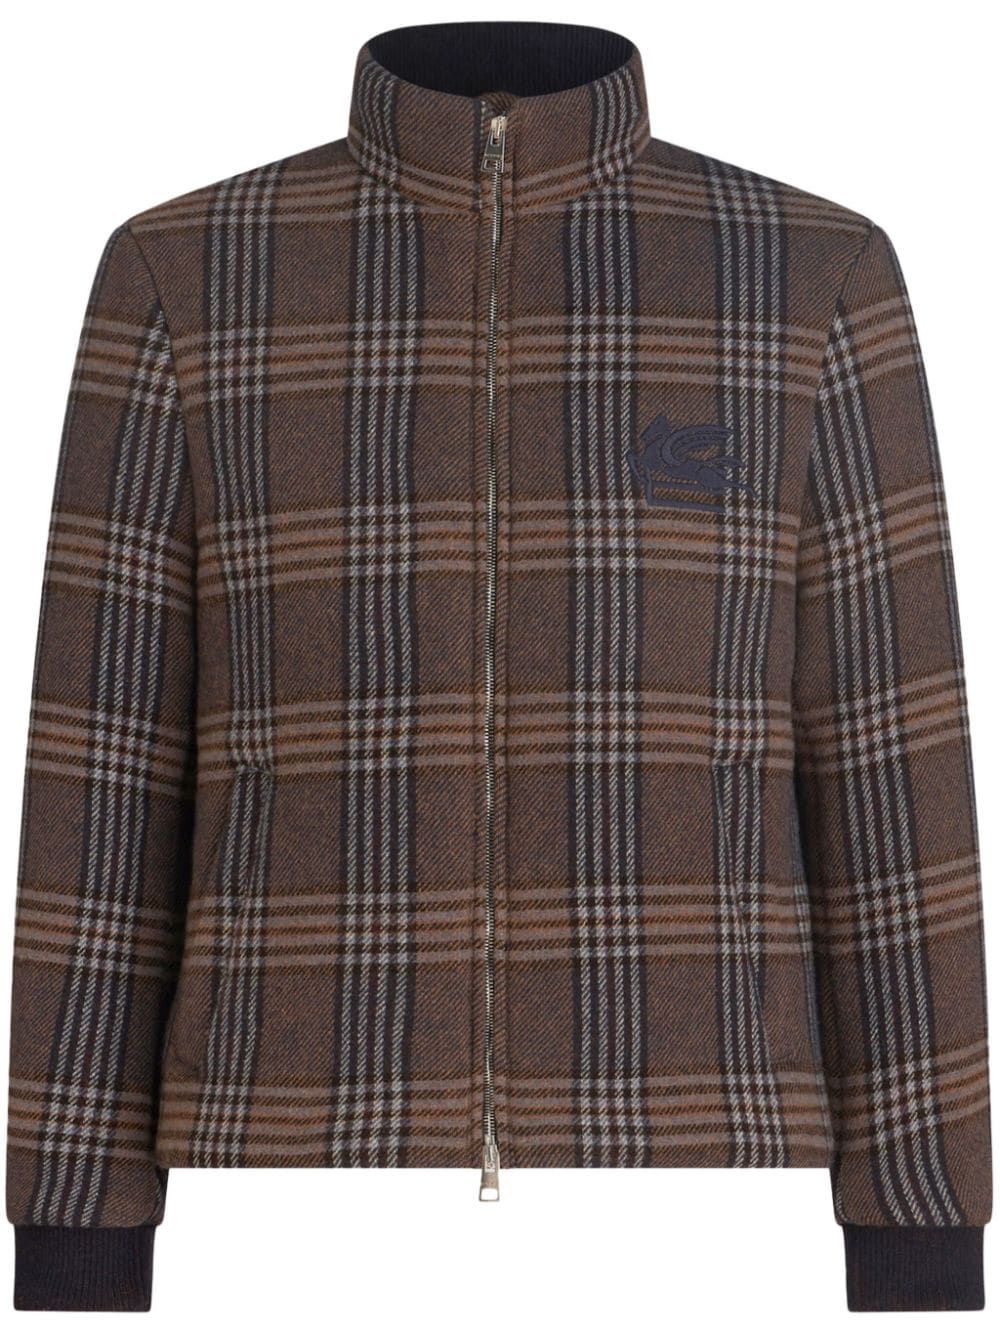 ETRO Blue Wool Padded Jacket for Men - FW23 Collection